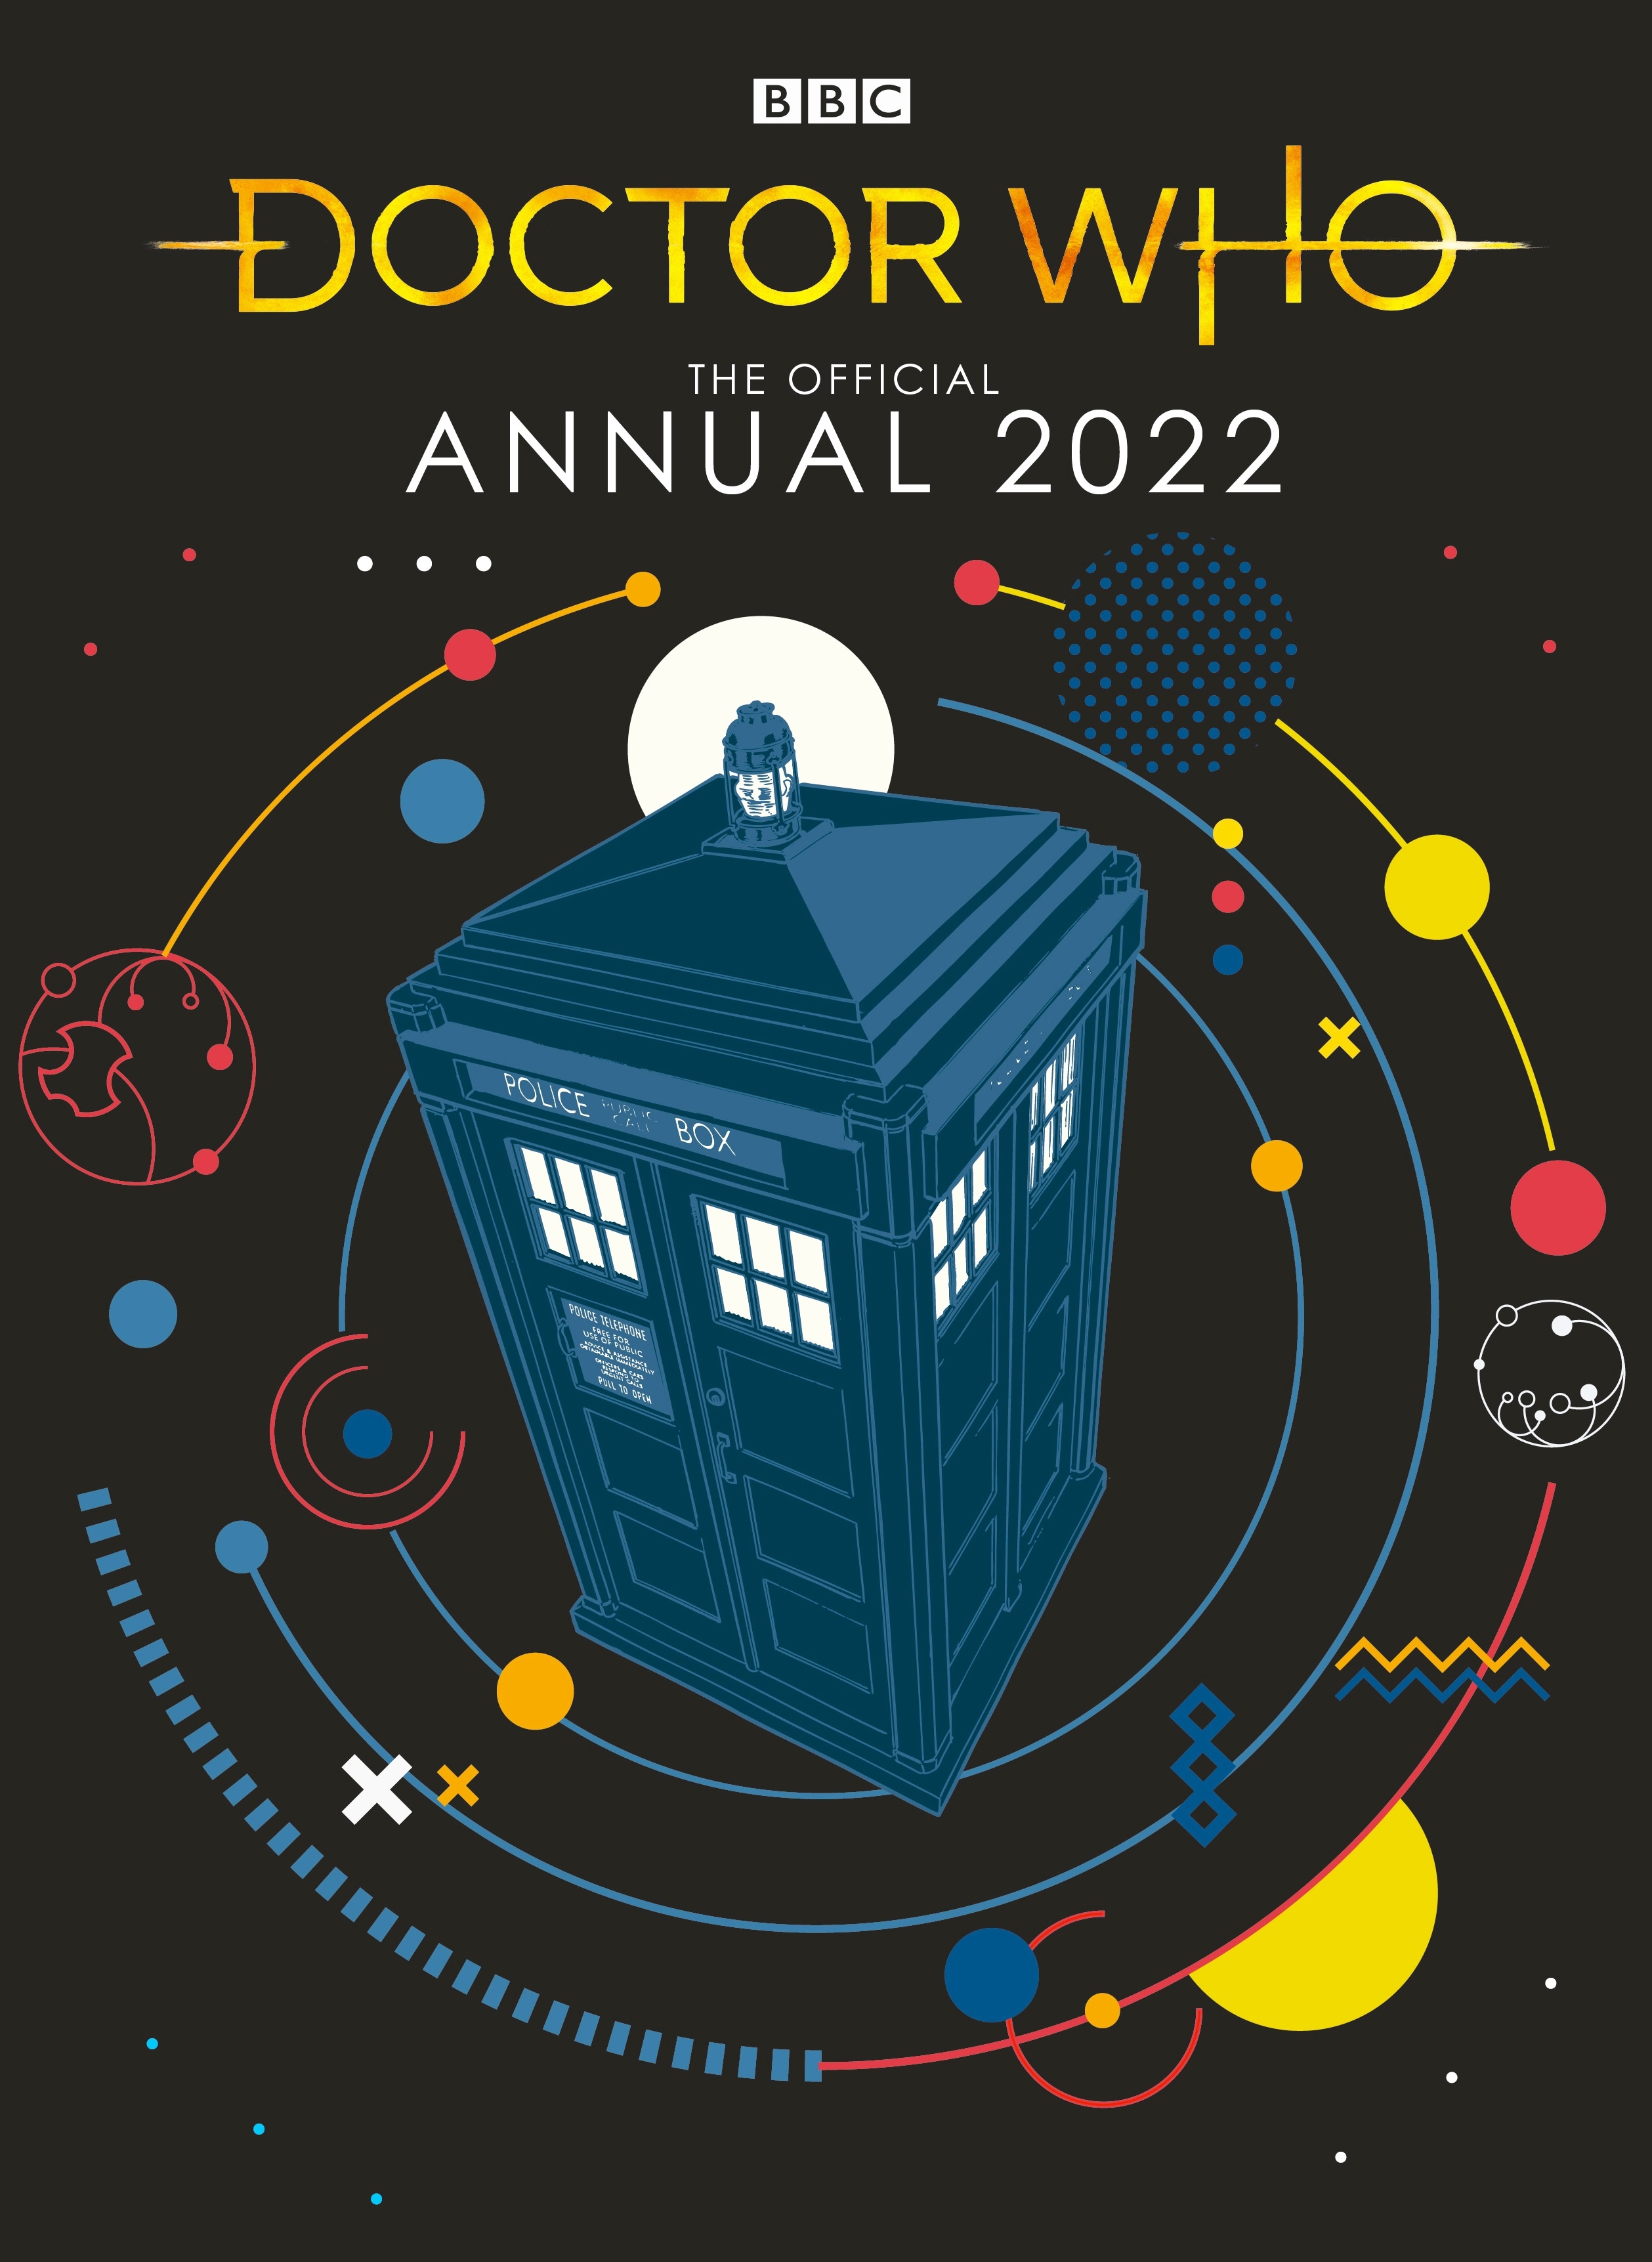 Book “Doctor Who Annual 2022” by Doctor Who — September 2, 2021